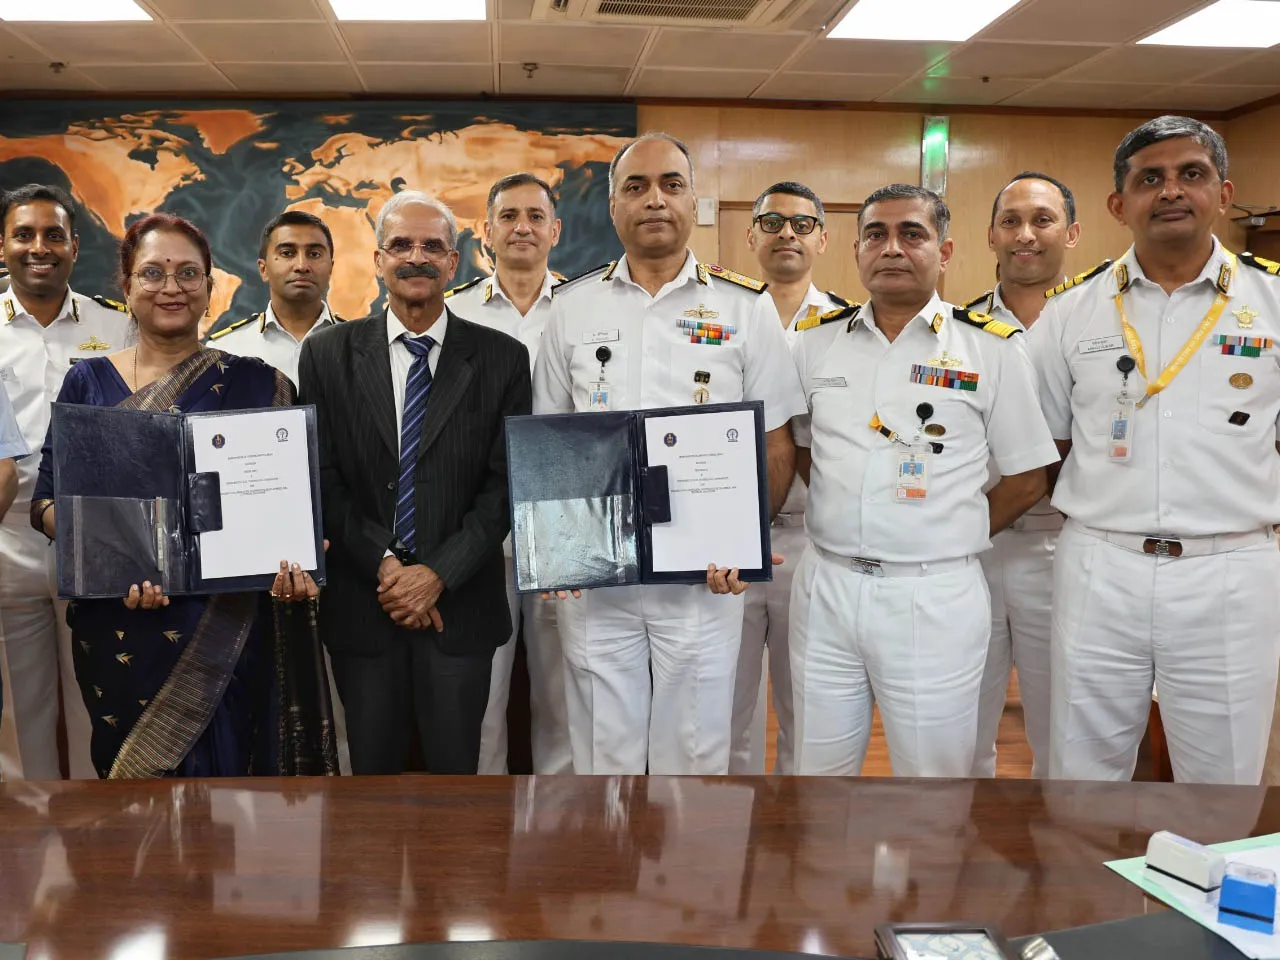 IIT Kharagpur And Indian Navy Joins Forces To Drive Innovation Through Research Partnership